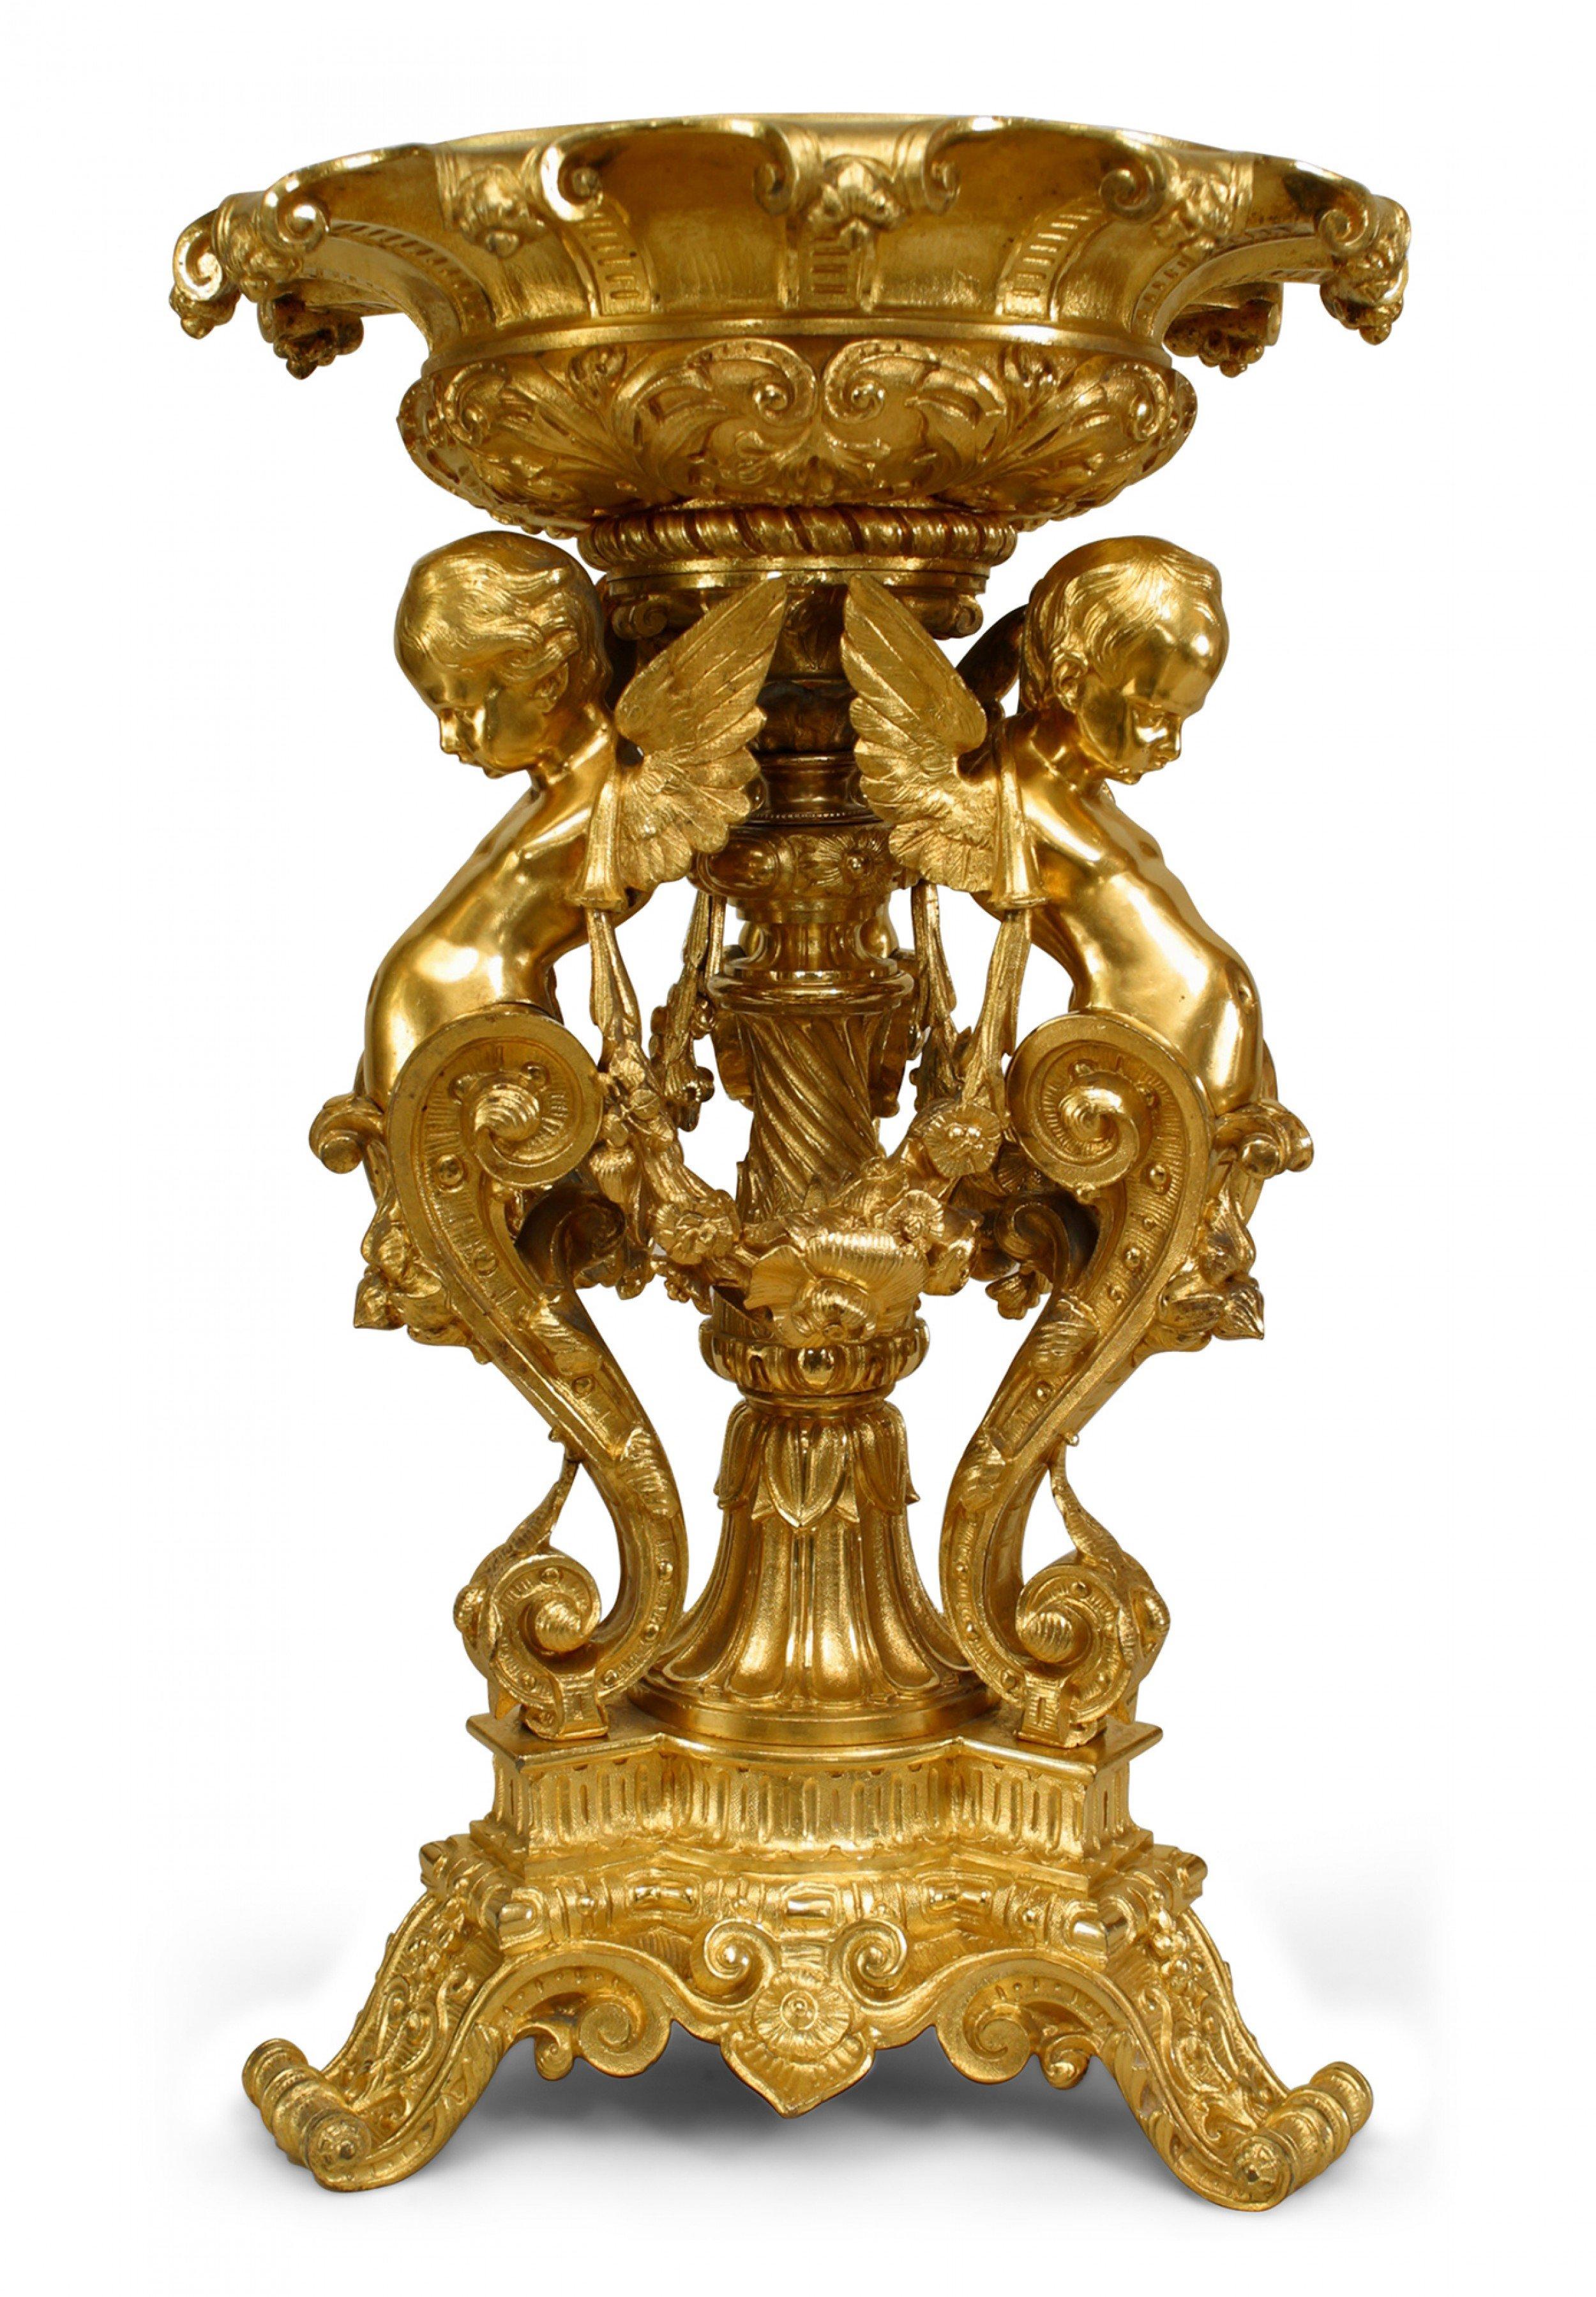 French Louis XV-style (19th Century) bronze dore triple cupid design centerpiece with swags between figures under a crystal round bowl with fluted gilt trim.
 